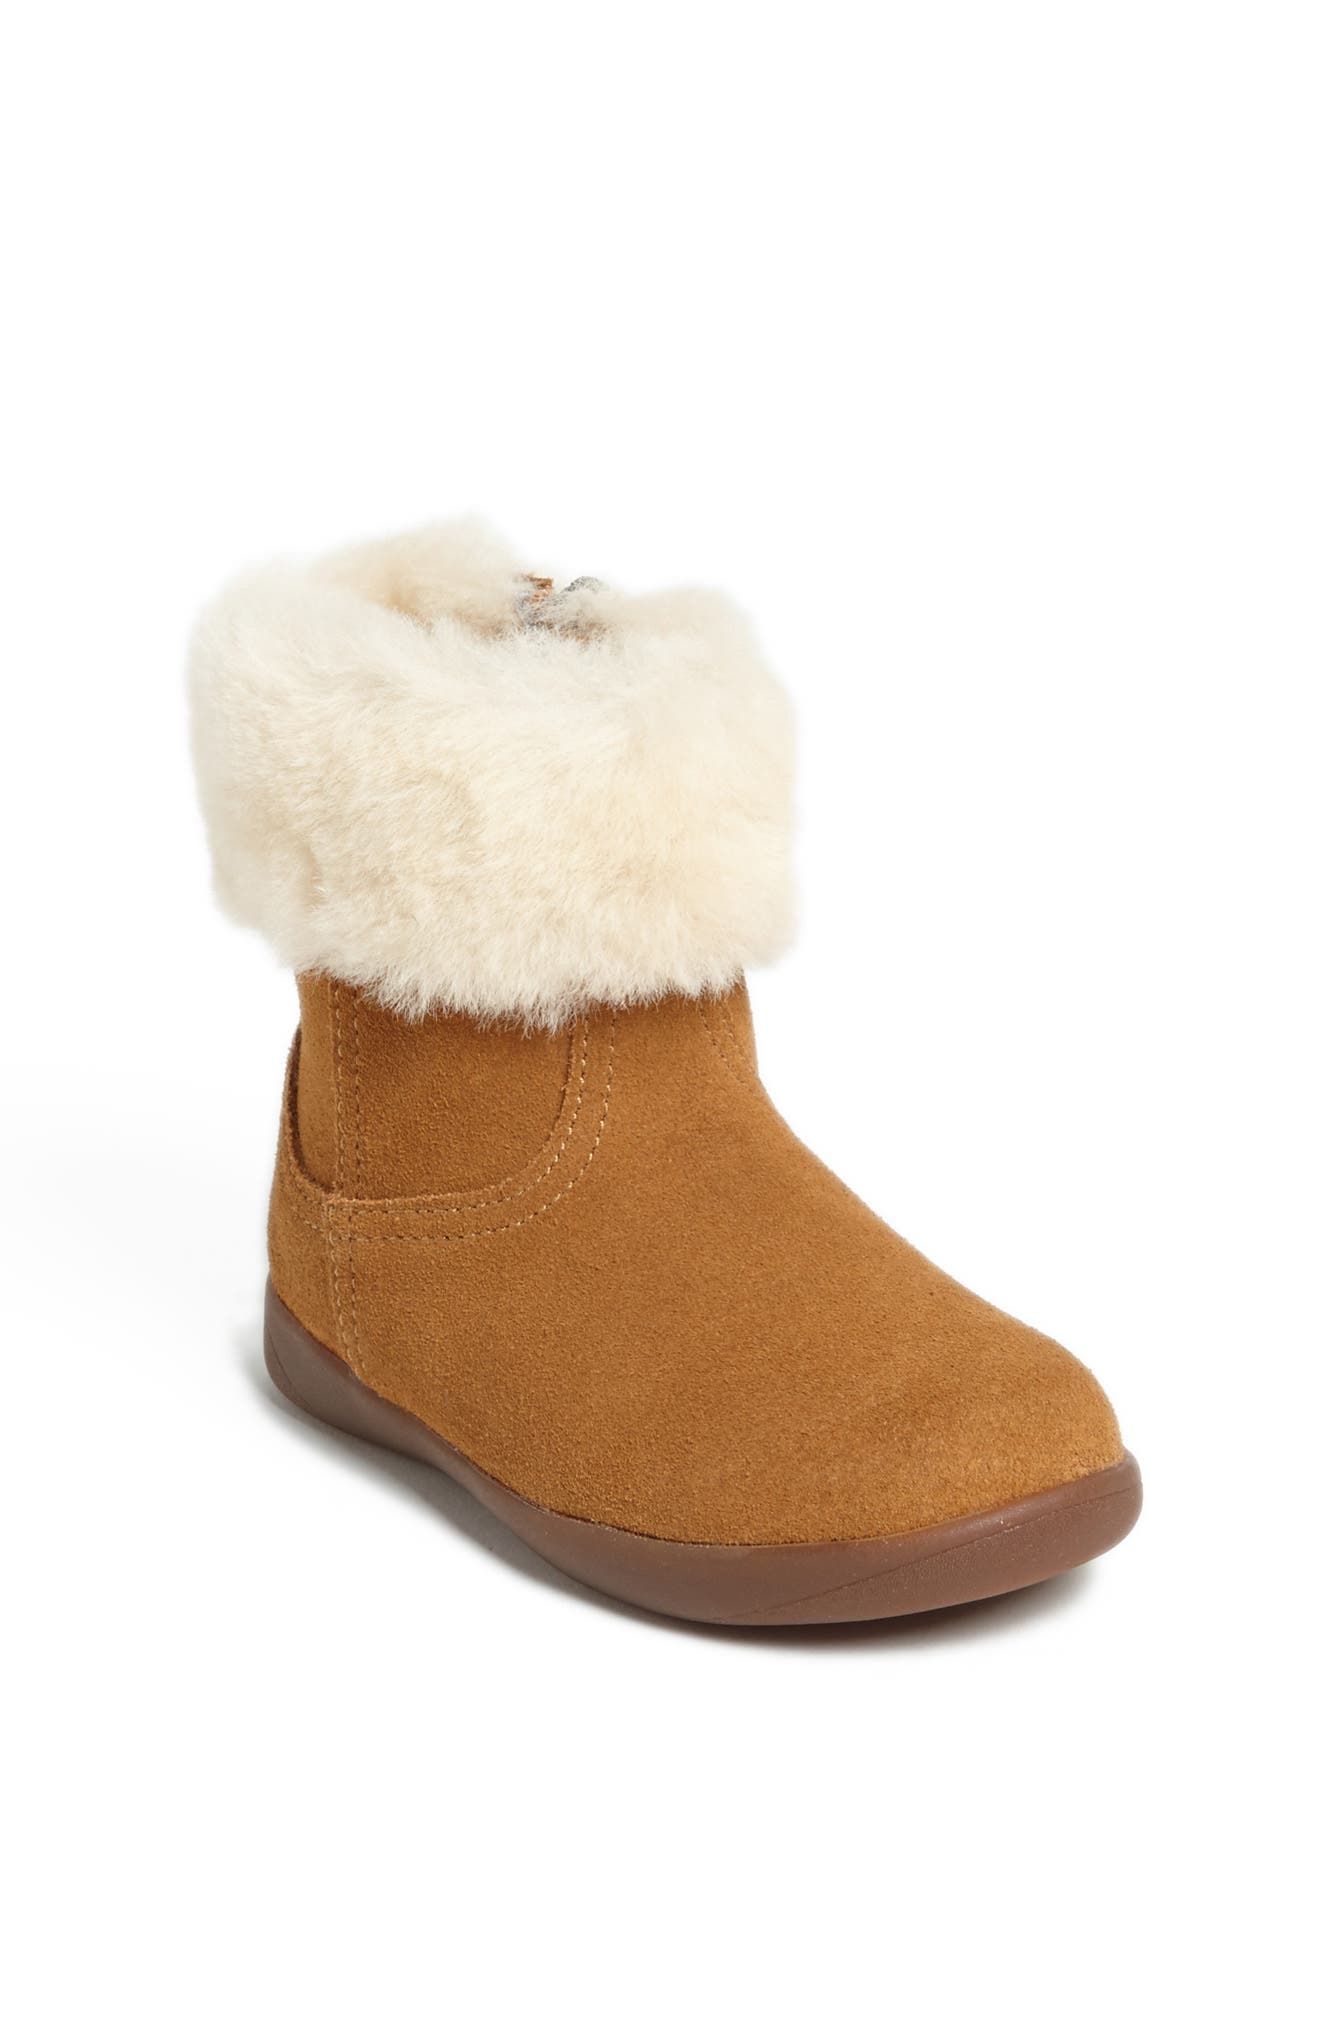 uggs for kids near me